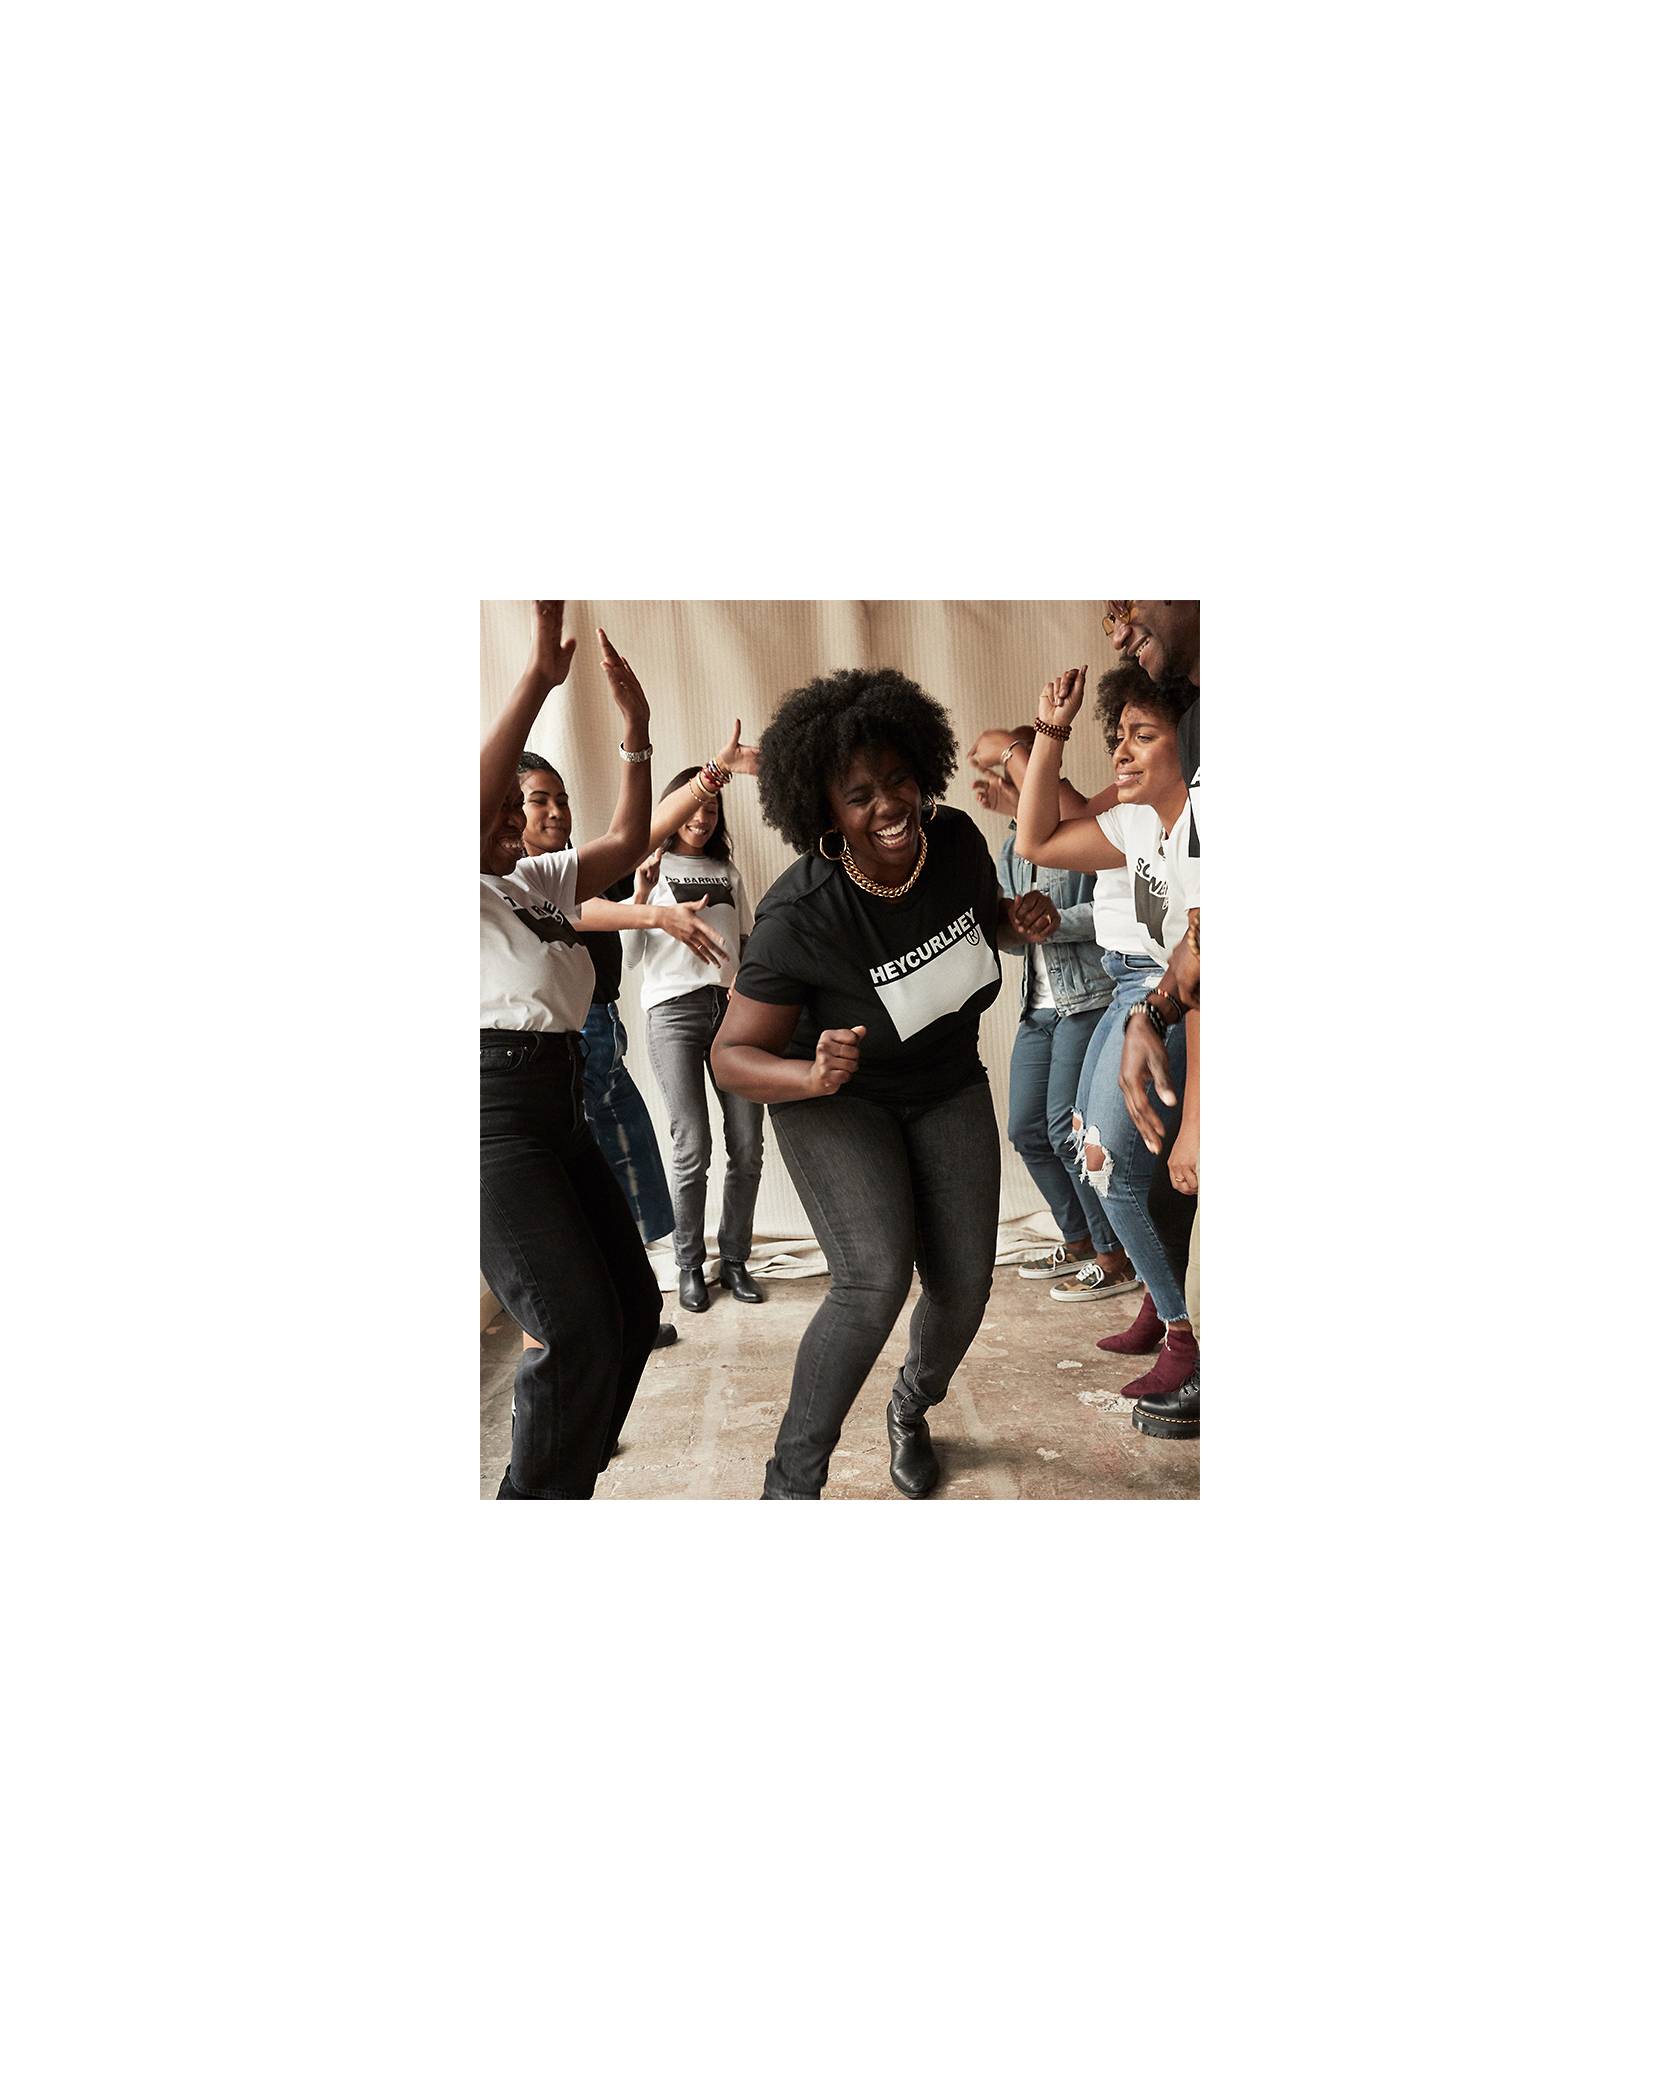 Levi's® employees celebrating Black History Month by dancing.